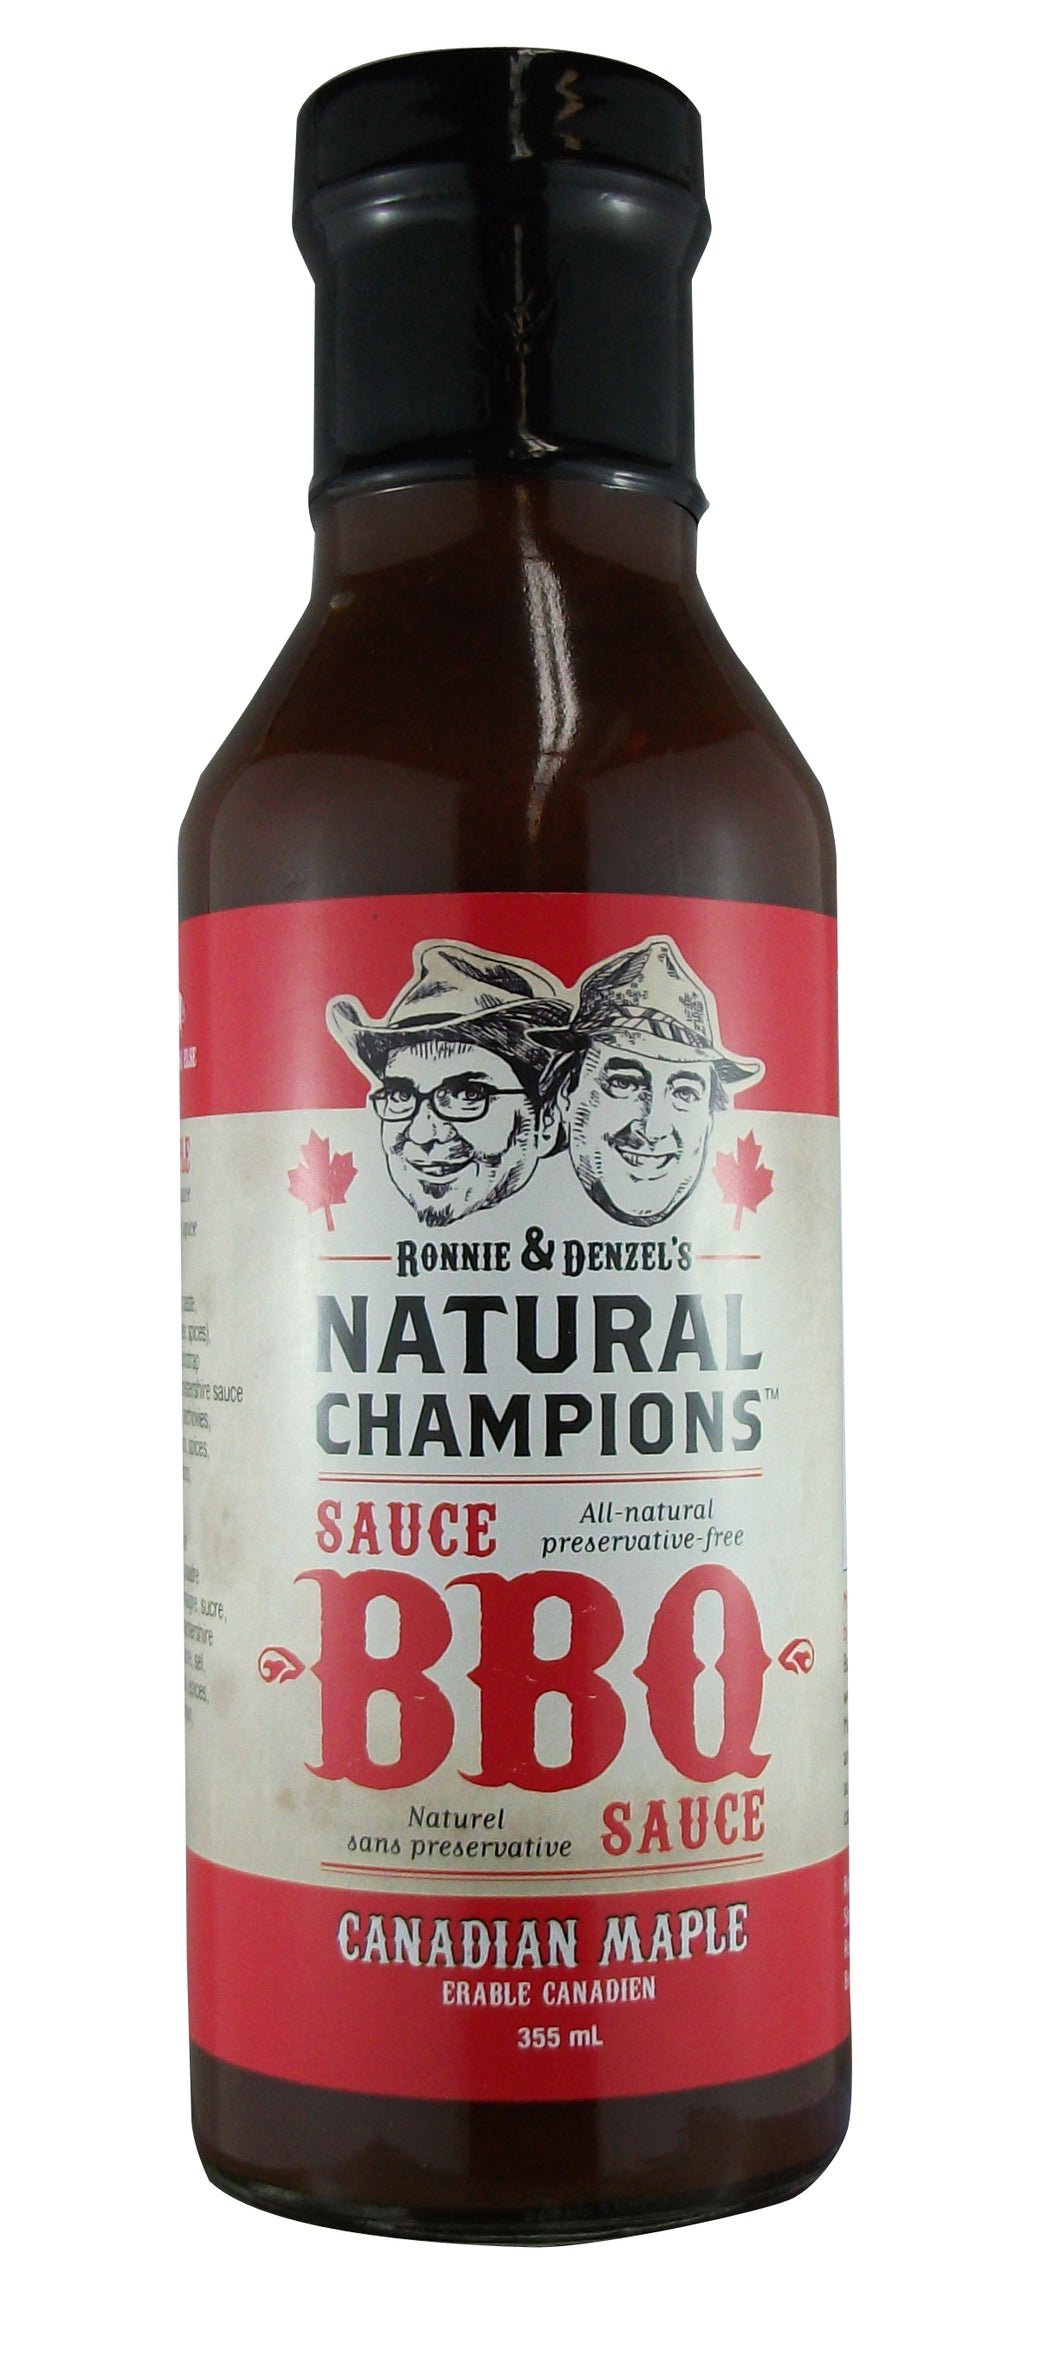 A 355ml bottle of Ronnie and Denzel's Natural Champions Canadian Maple BBQ Sauce.